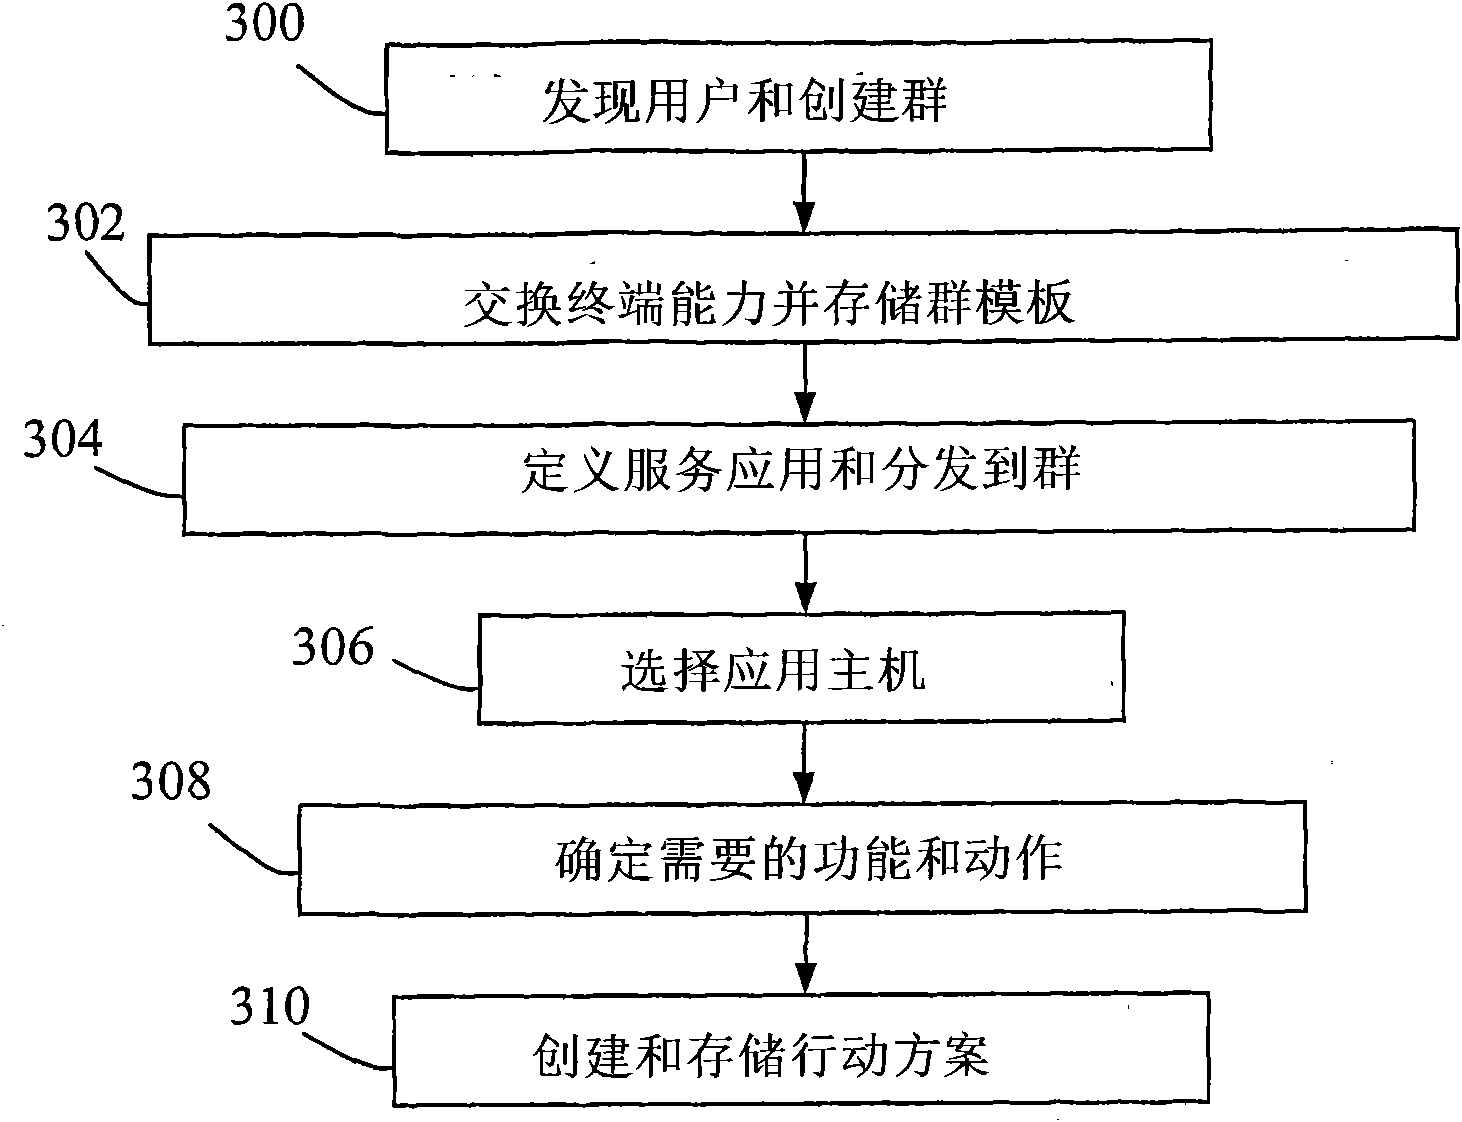 A method and apparatus for enabling user services in communication network